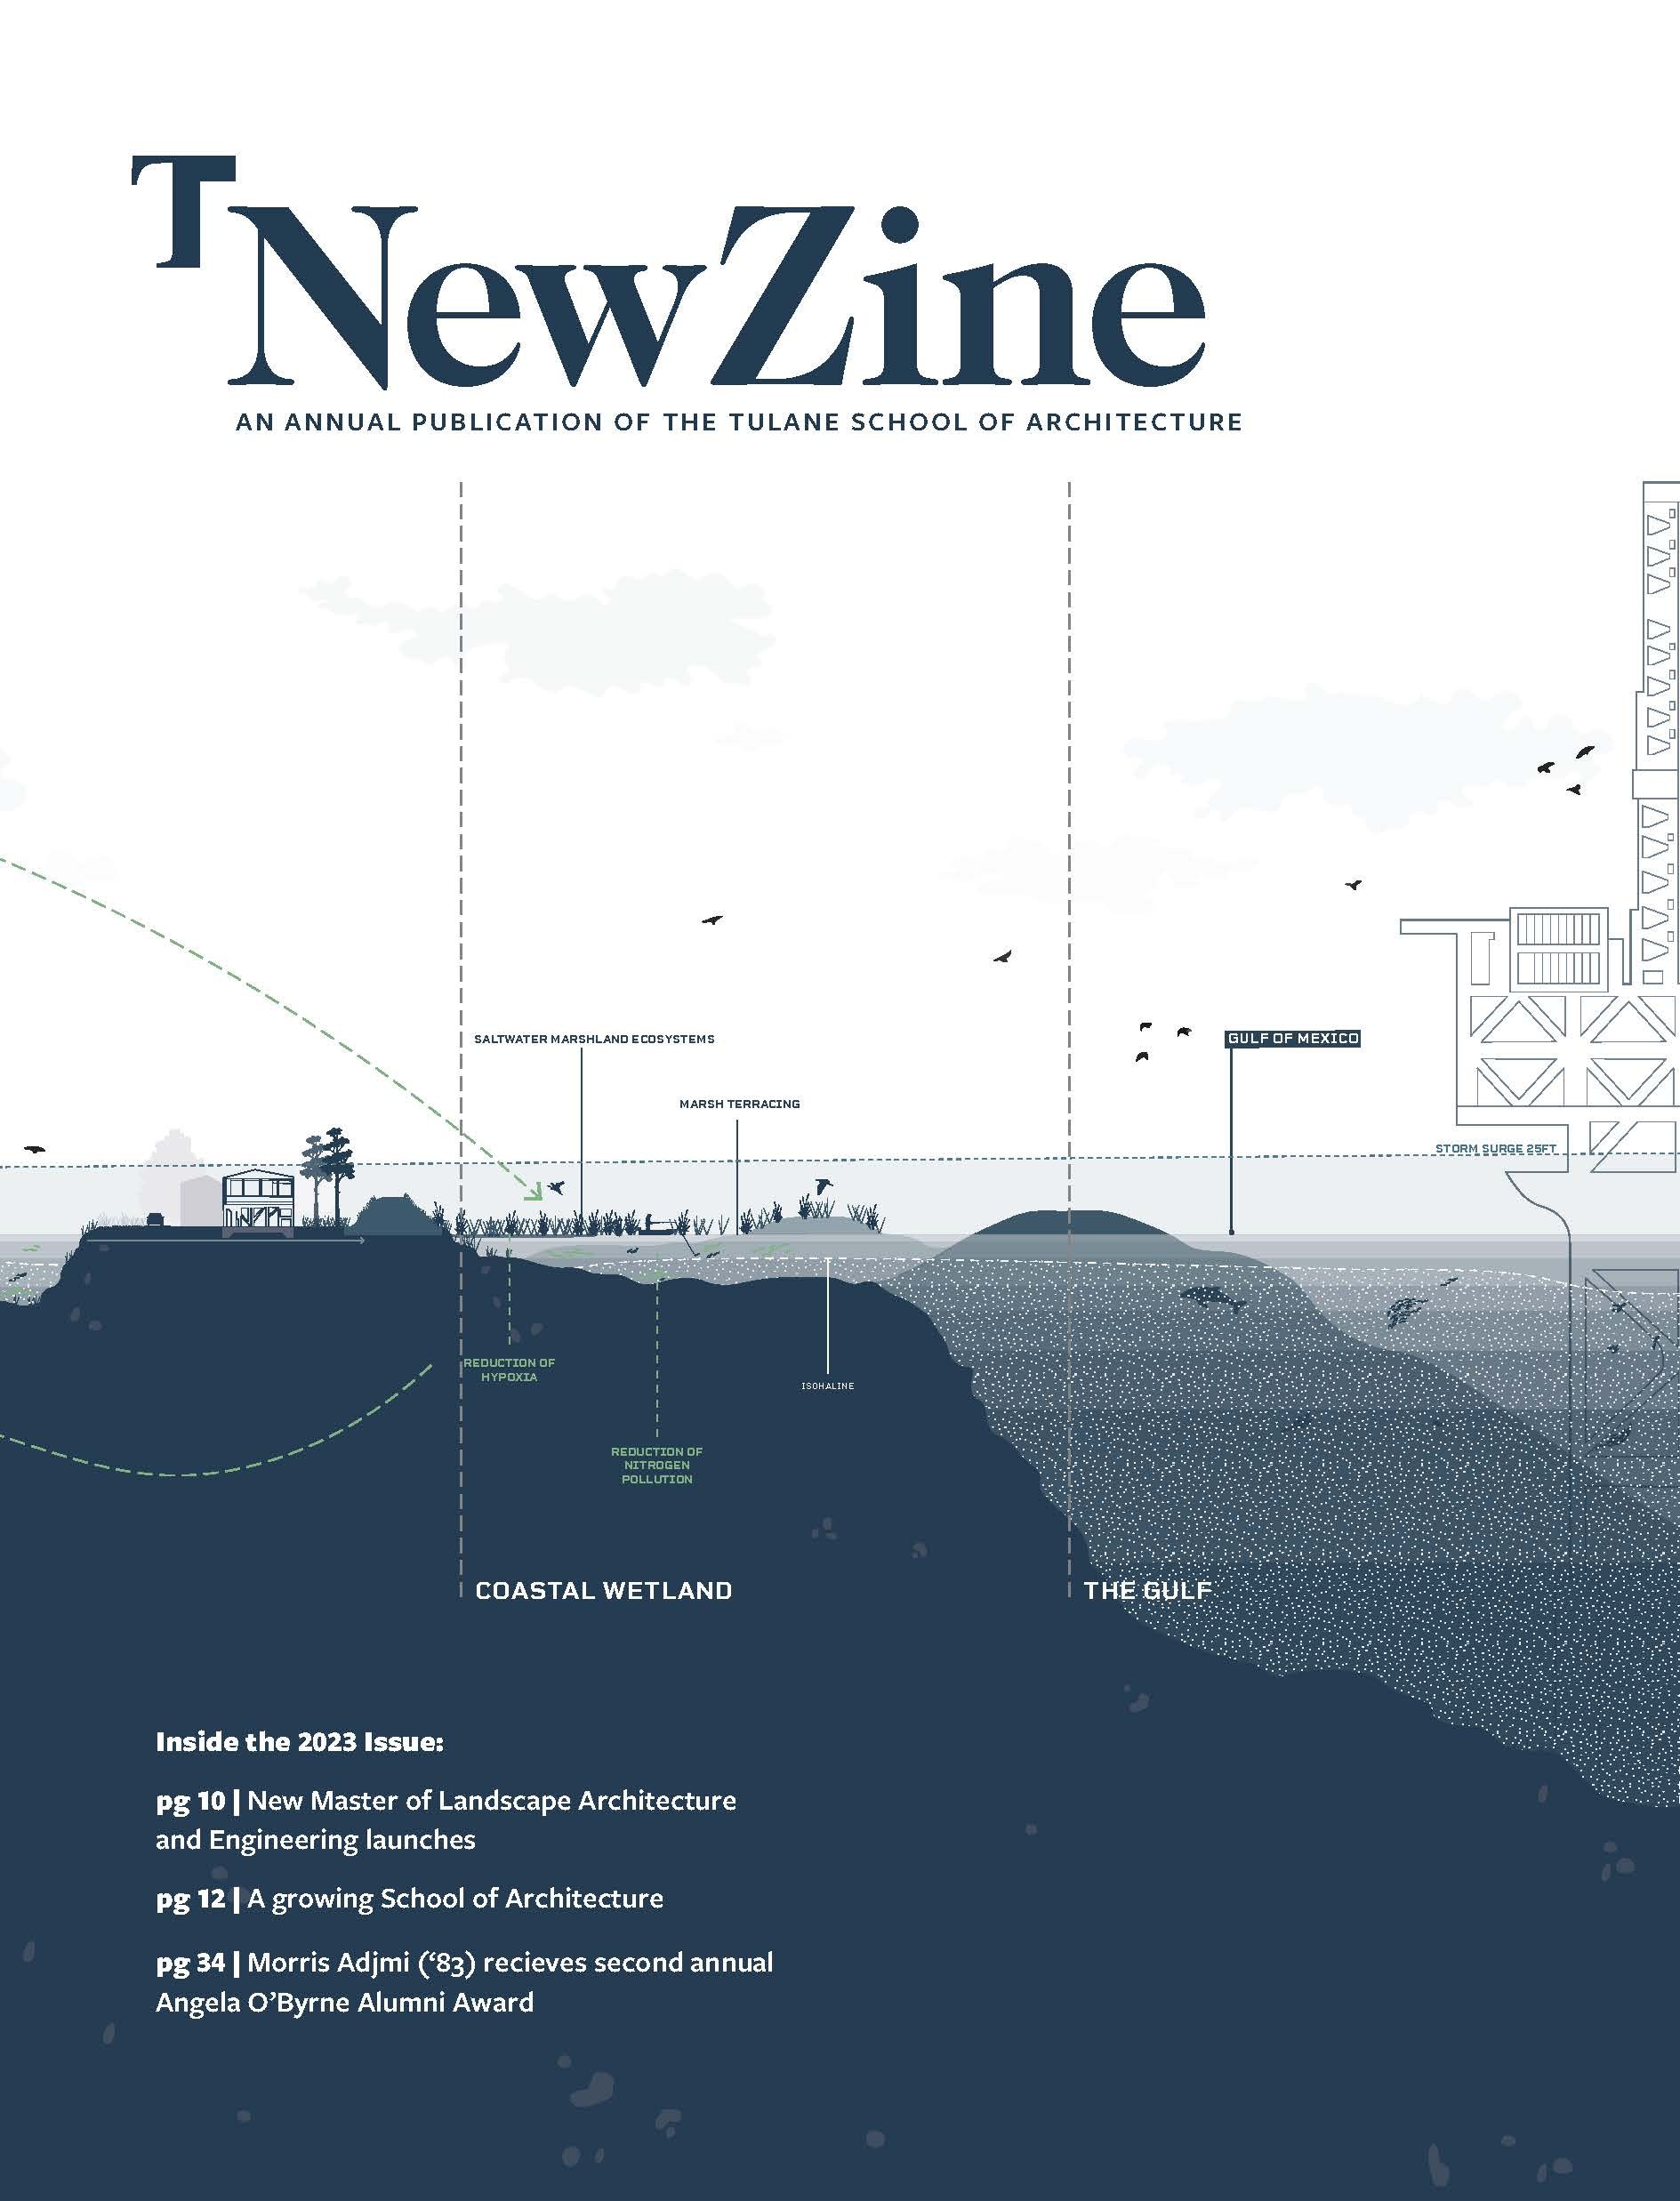 Cover of NewZine 2023, showing a section digital drawing of a coastal landscape.